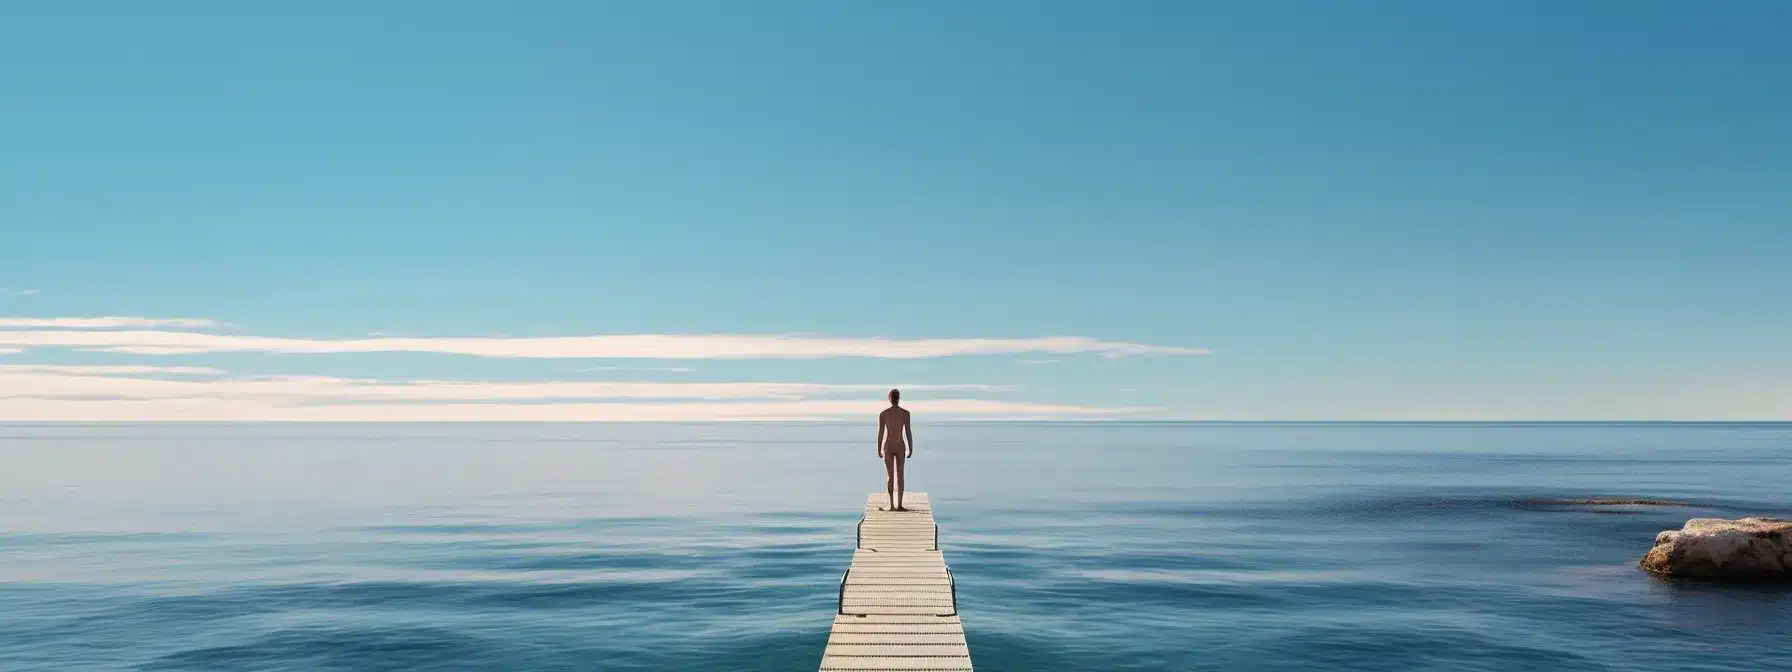 A Person Standing On The Edge Of A Diving Board, Preparing To Dive Into A Vast And Mysterious Ocean.